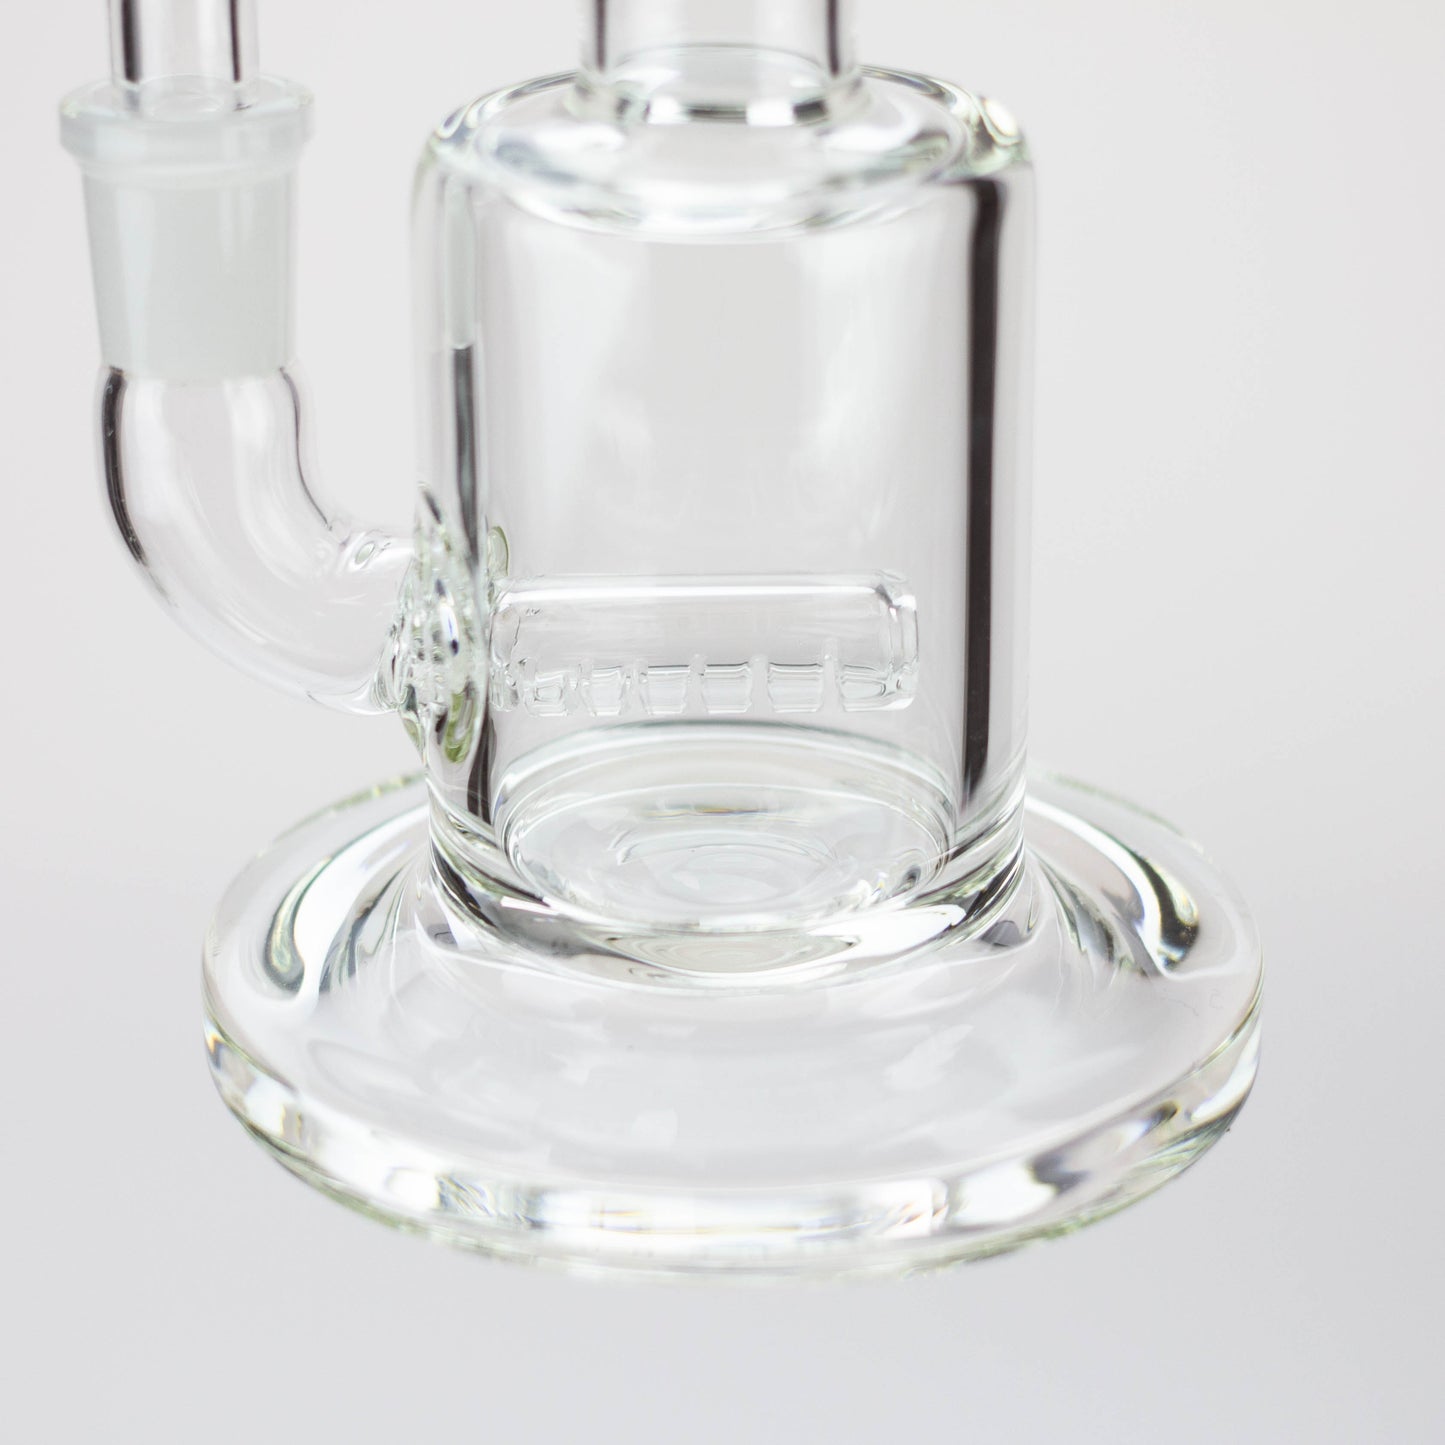 NG-8 inch Inline Bubbler [S314]_10